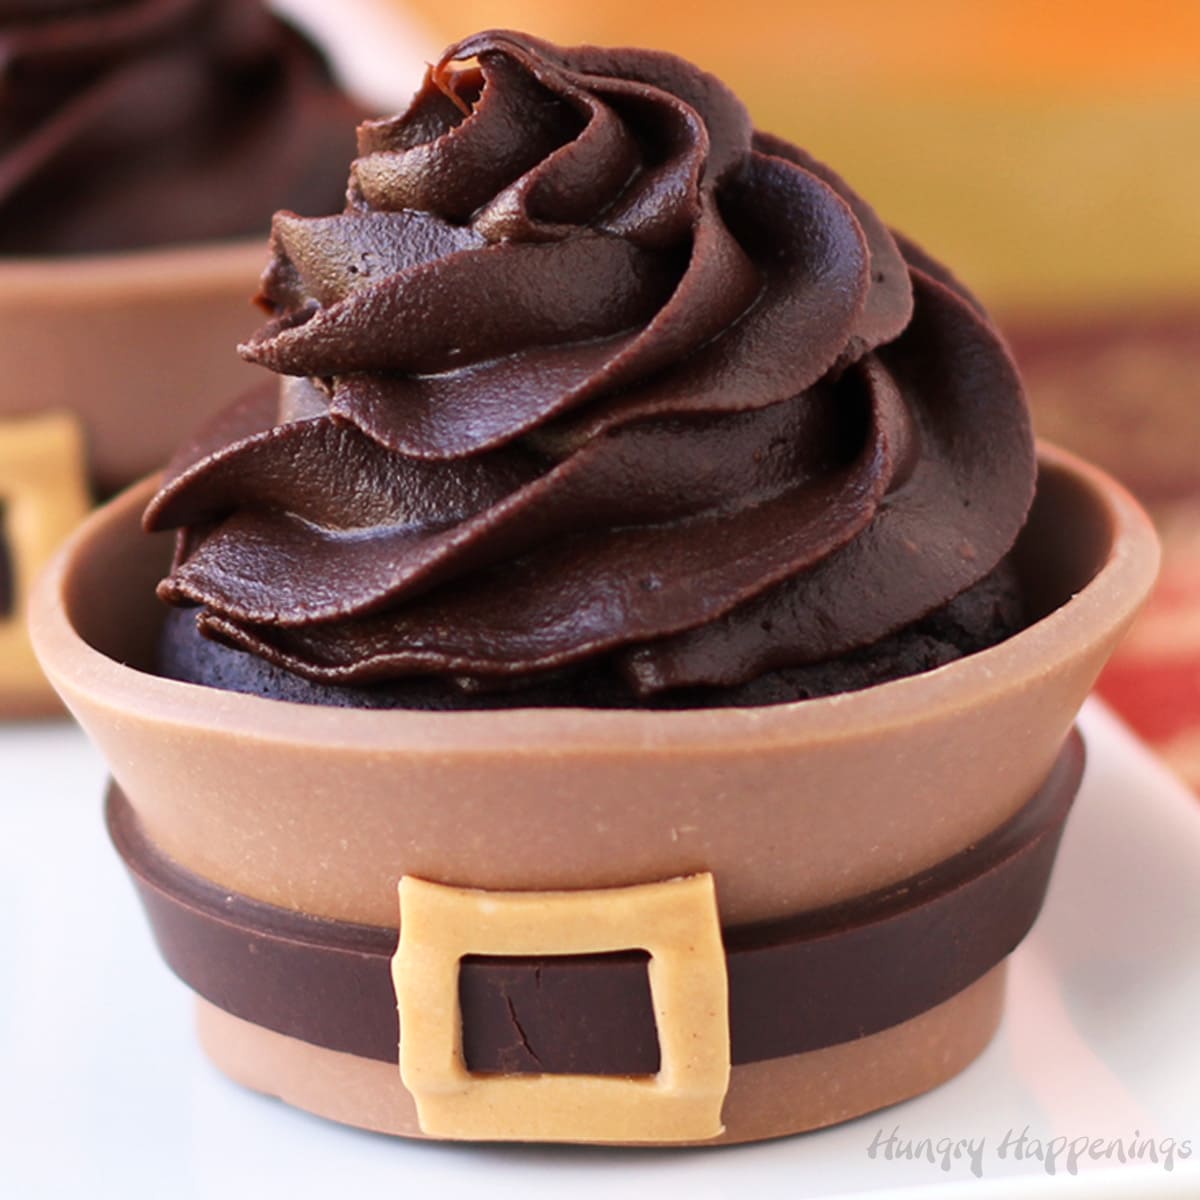 Thanksgiving cupcakes decorated with chocolate pilgrim suit cupcake wrappers.